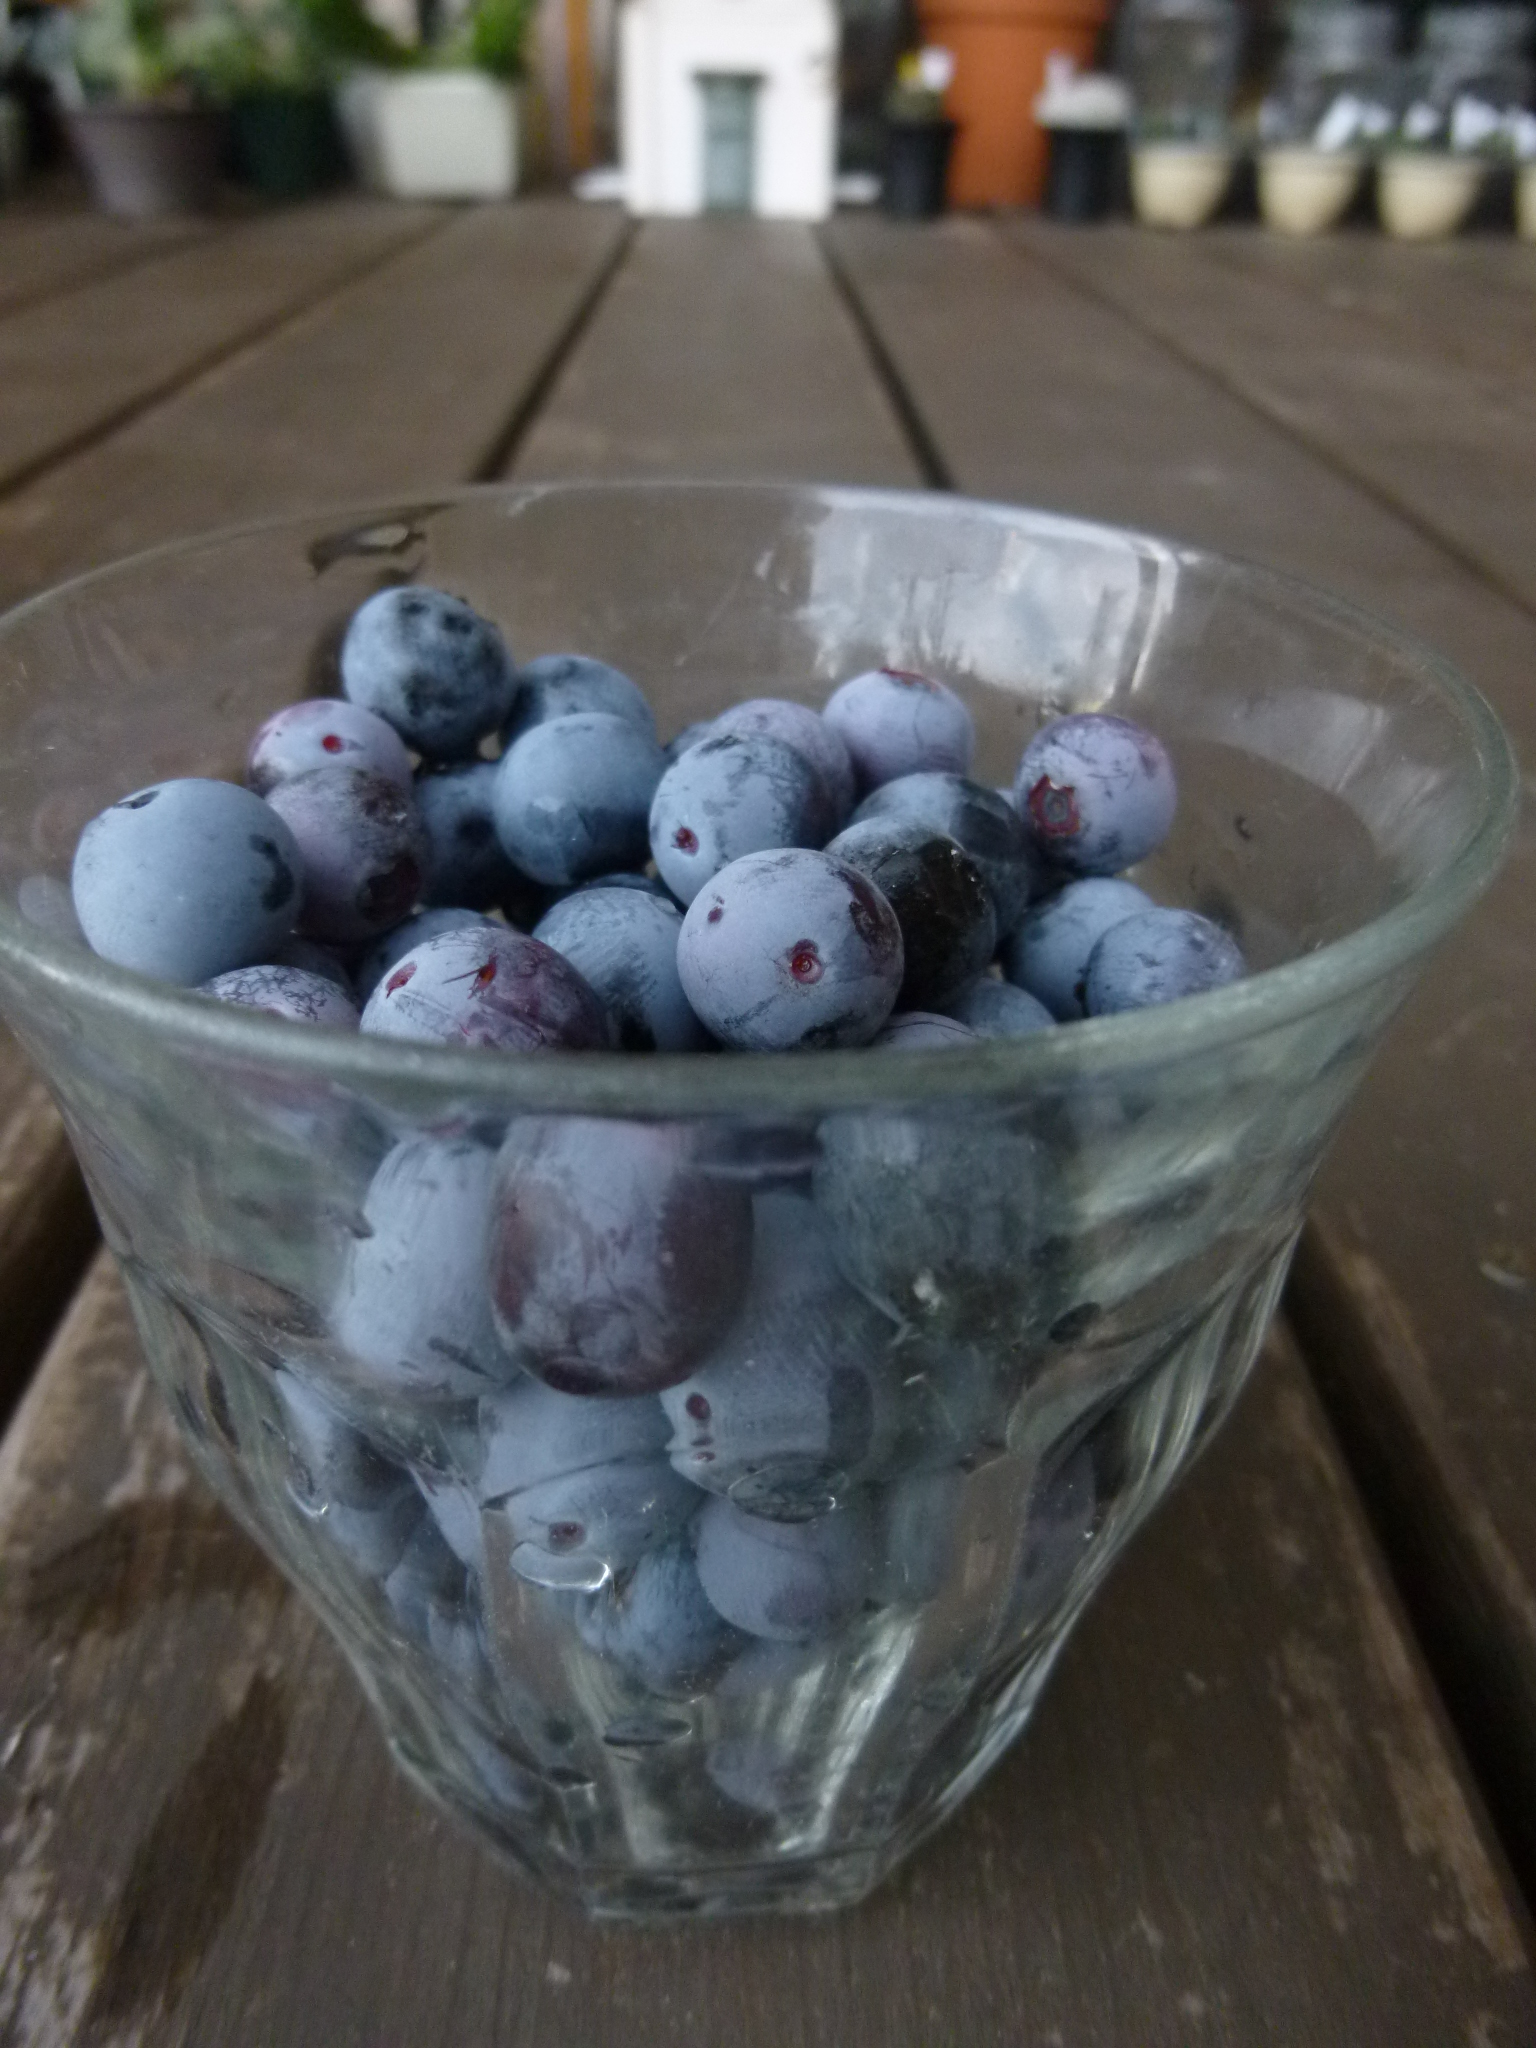 http://hungtime-times.com/hung_time_writers/entry_img/blueberry2014.JPG